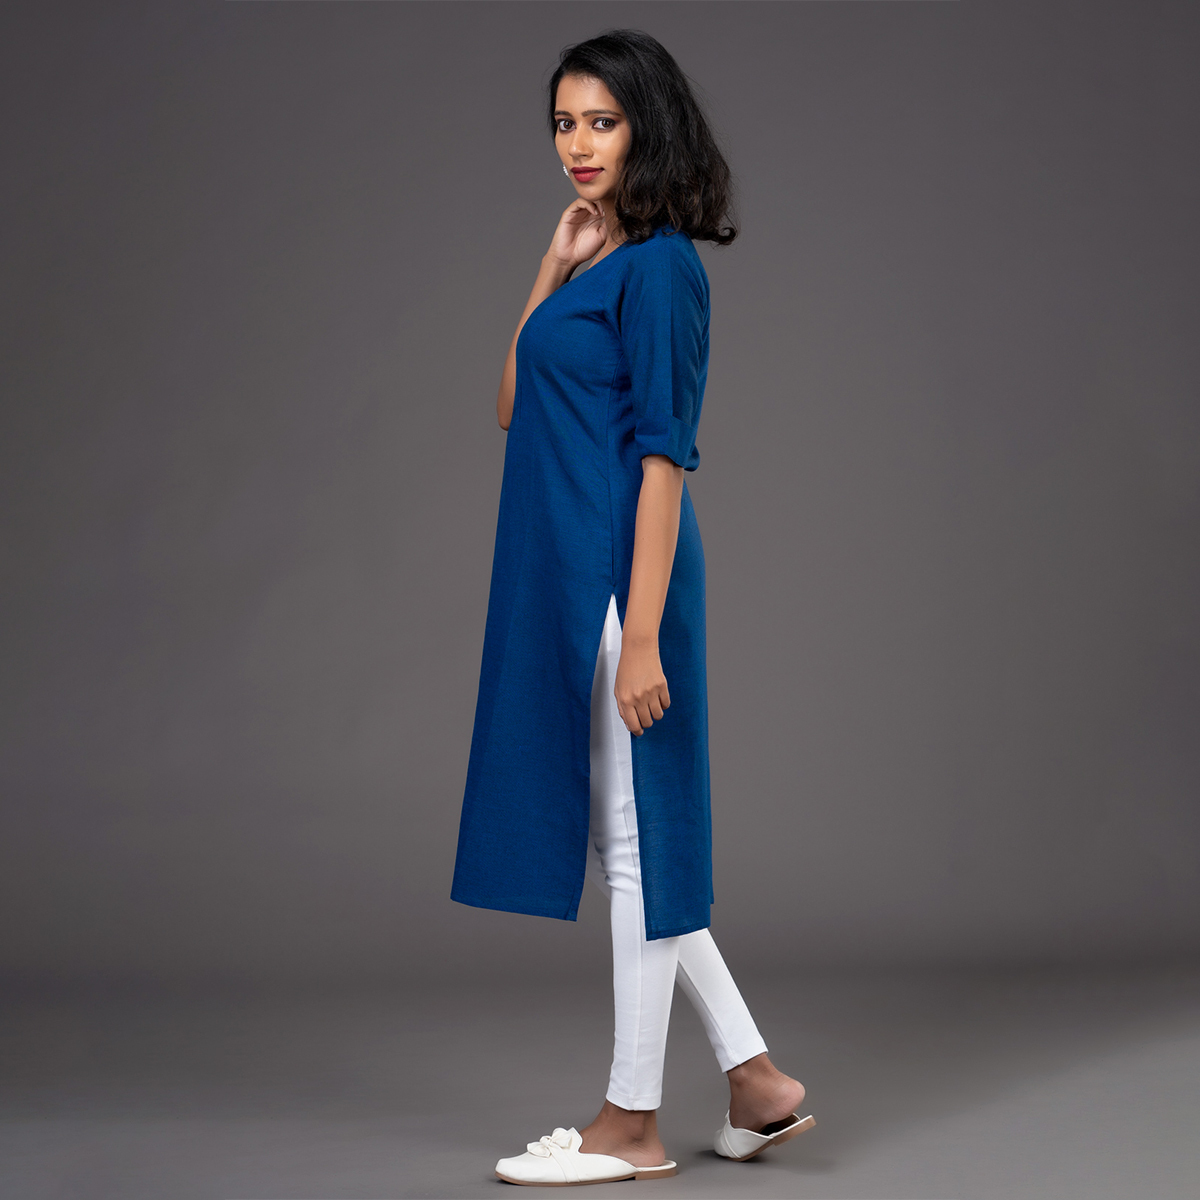 Zella Solid Color Side Slitted Straight Cut Kurta with Pin Tucked Yoke & Keyhole Back Neck - Royal Blue